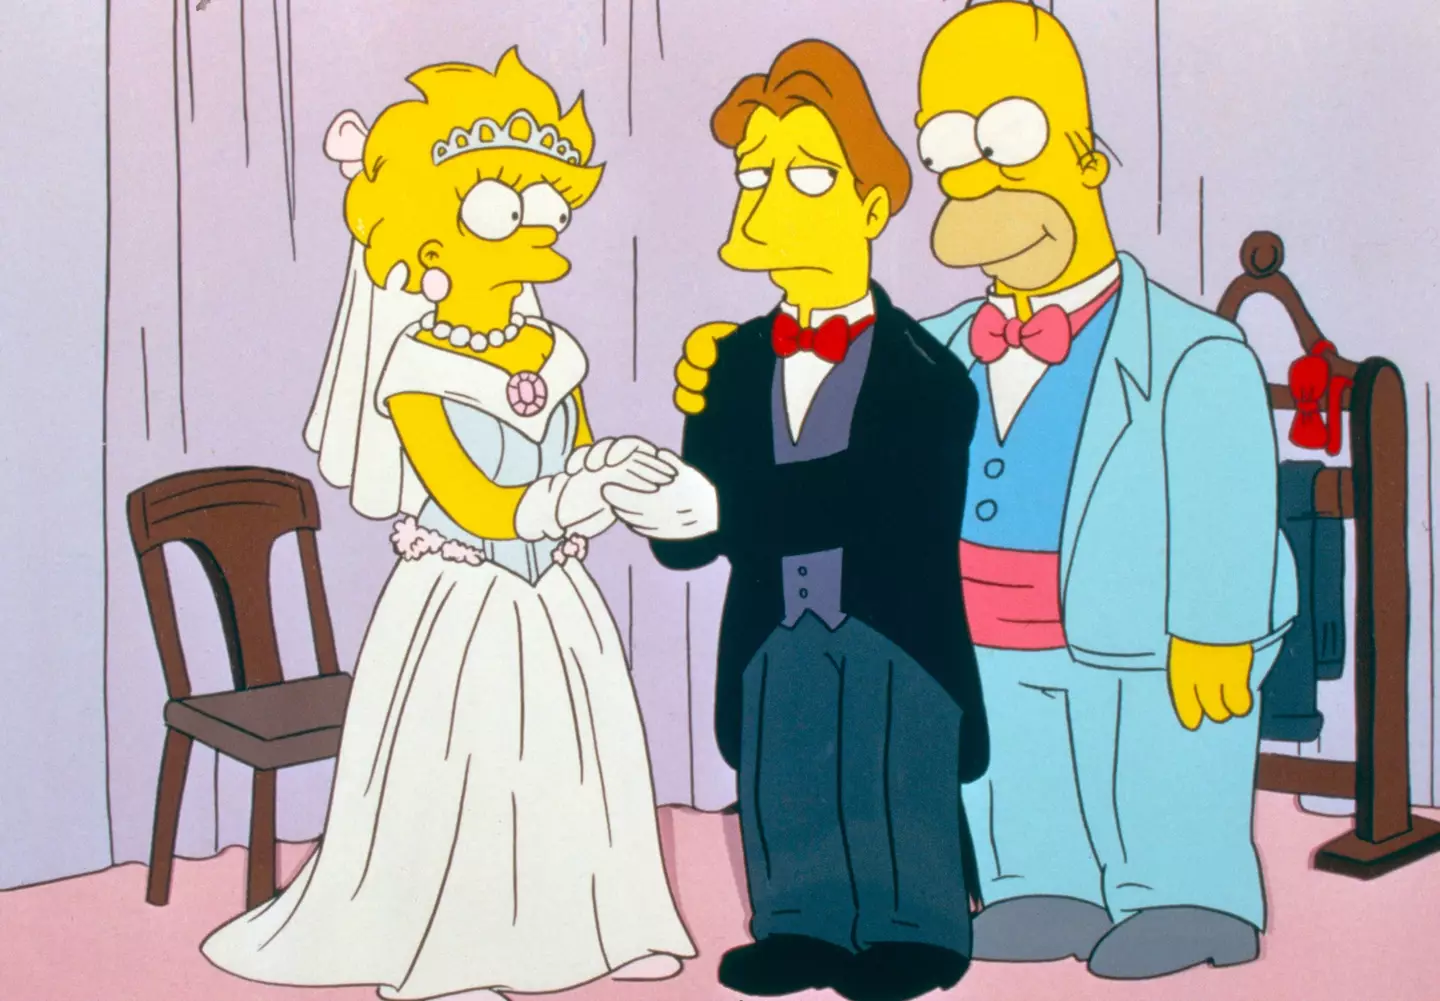 The Simpsons' creator wanted to make the characters unique.